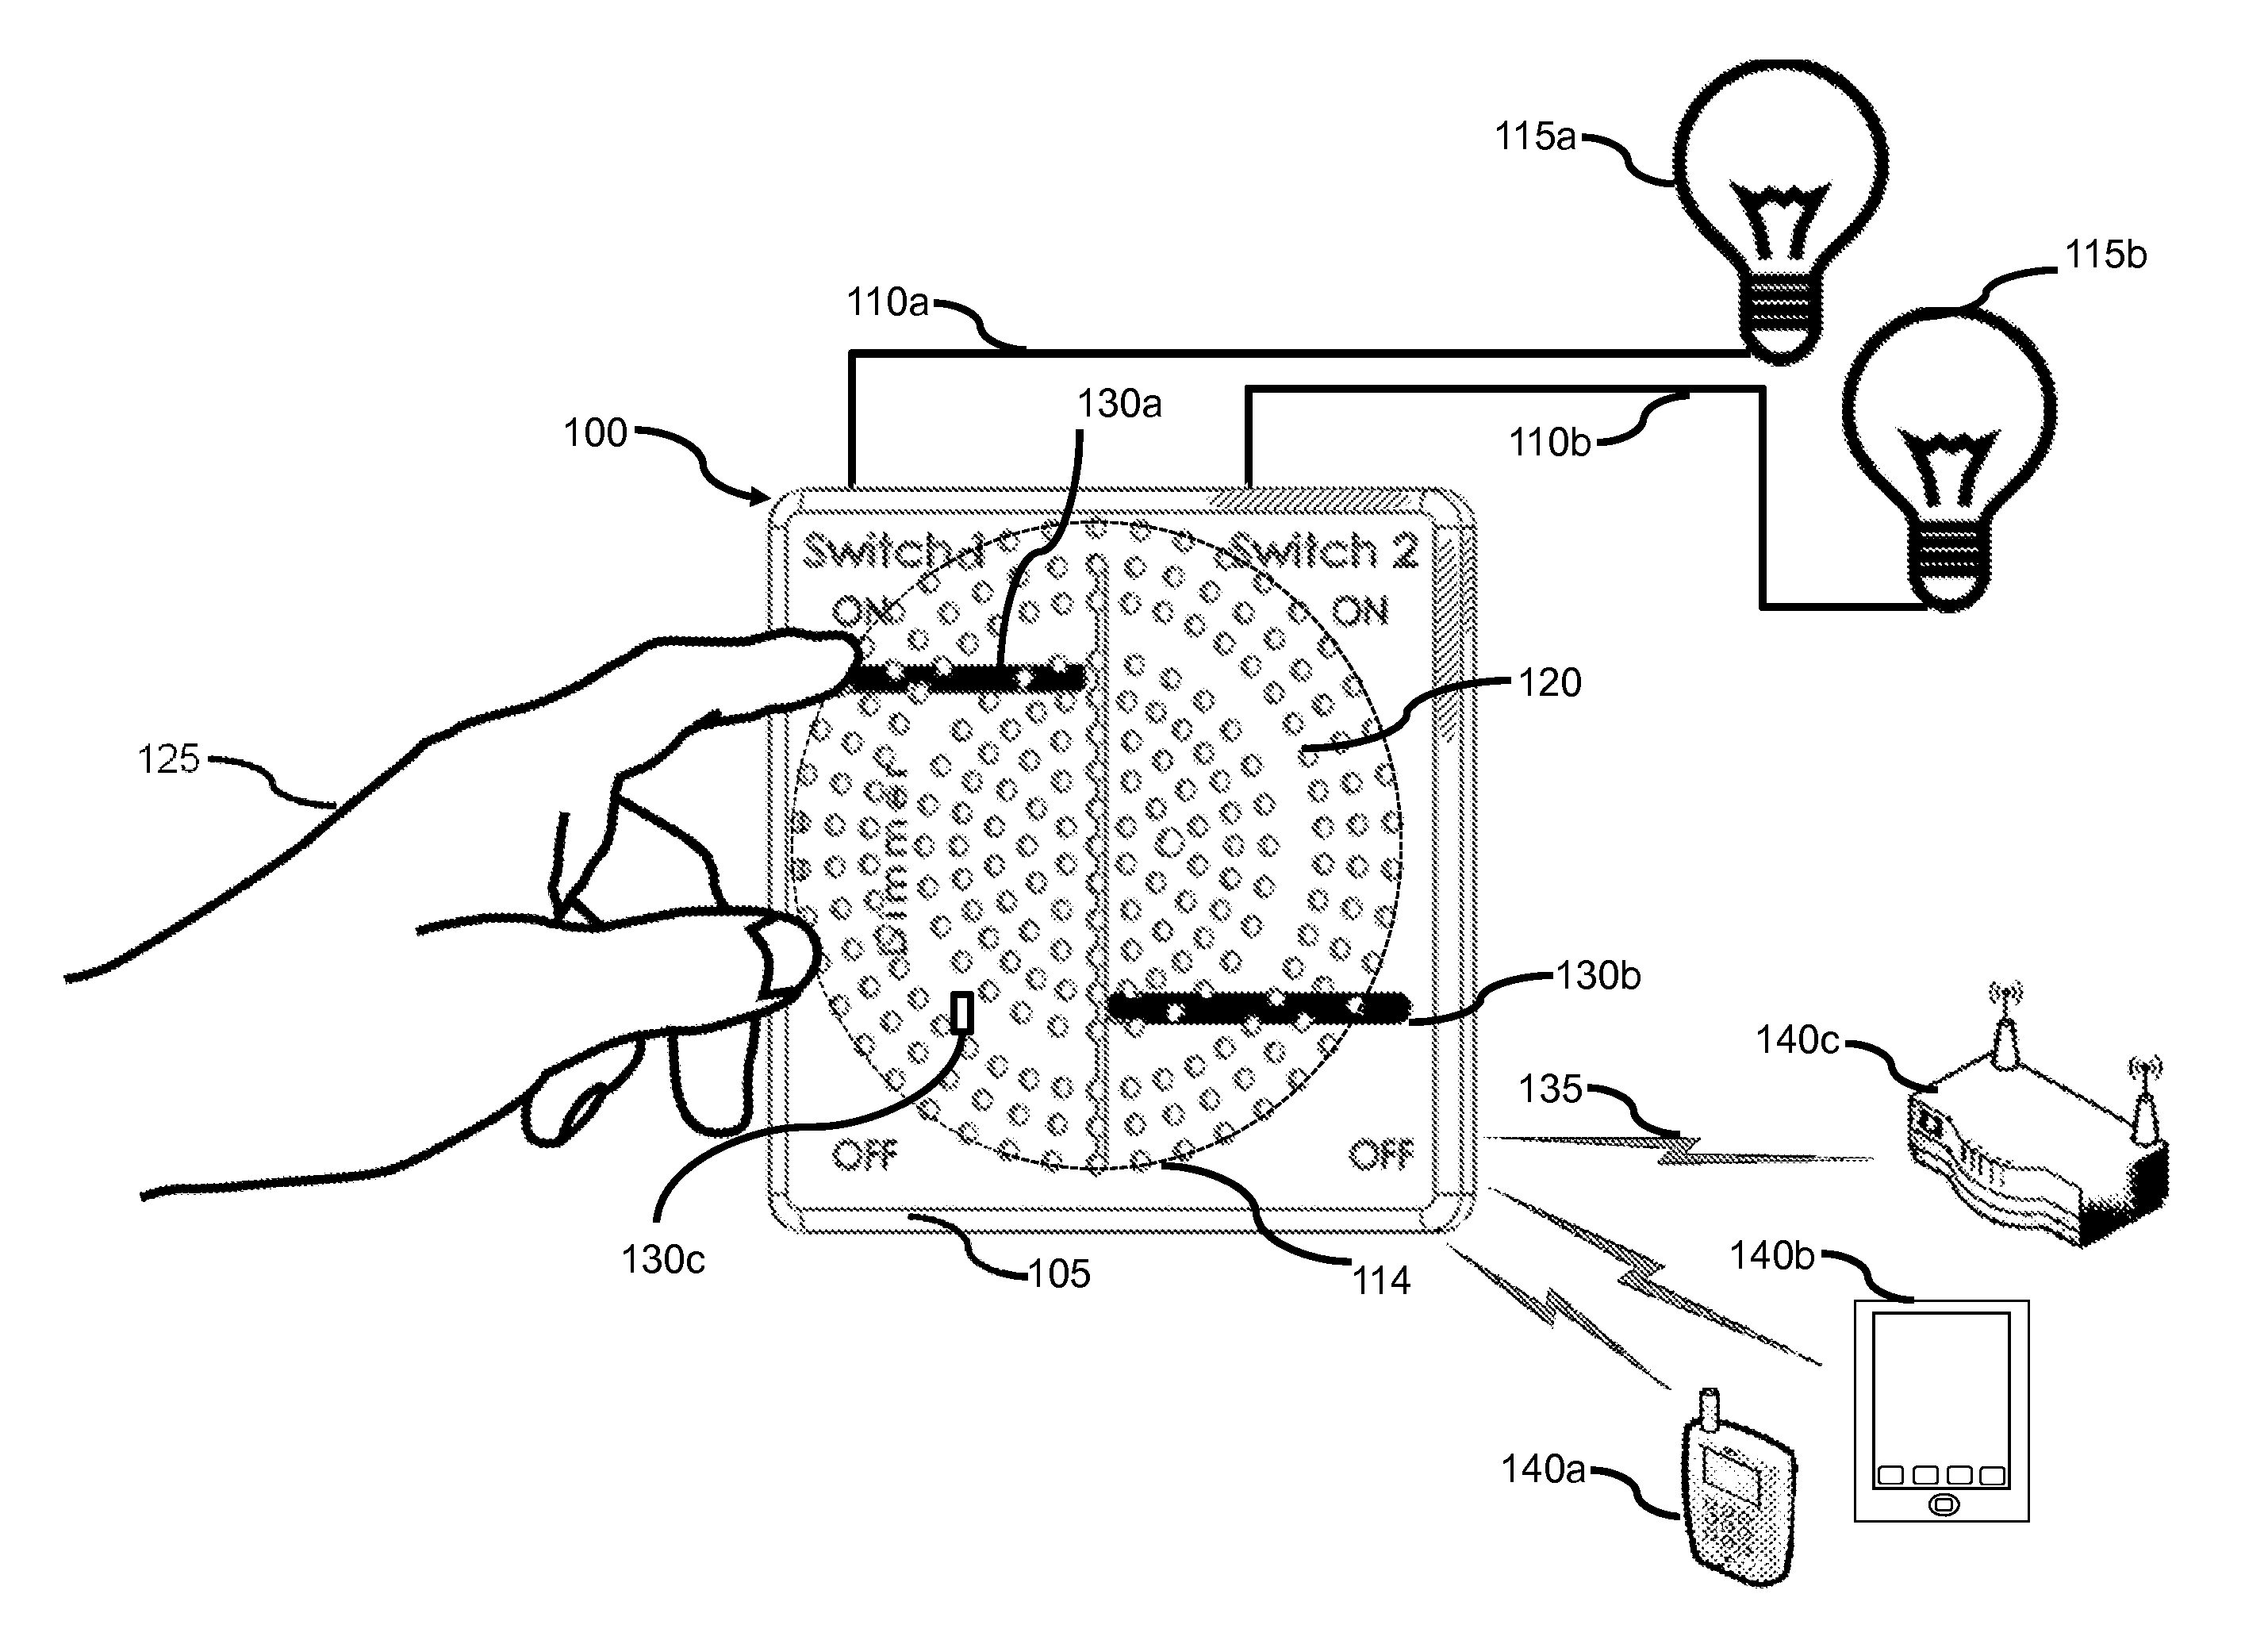 Smart electrical switch with audio capability